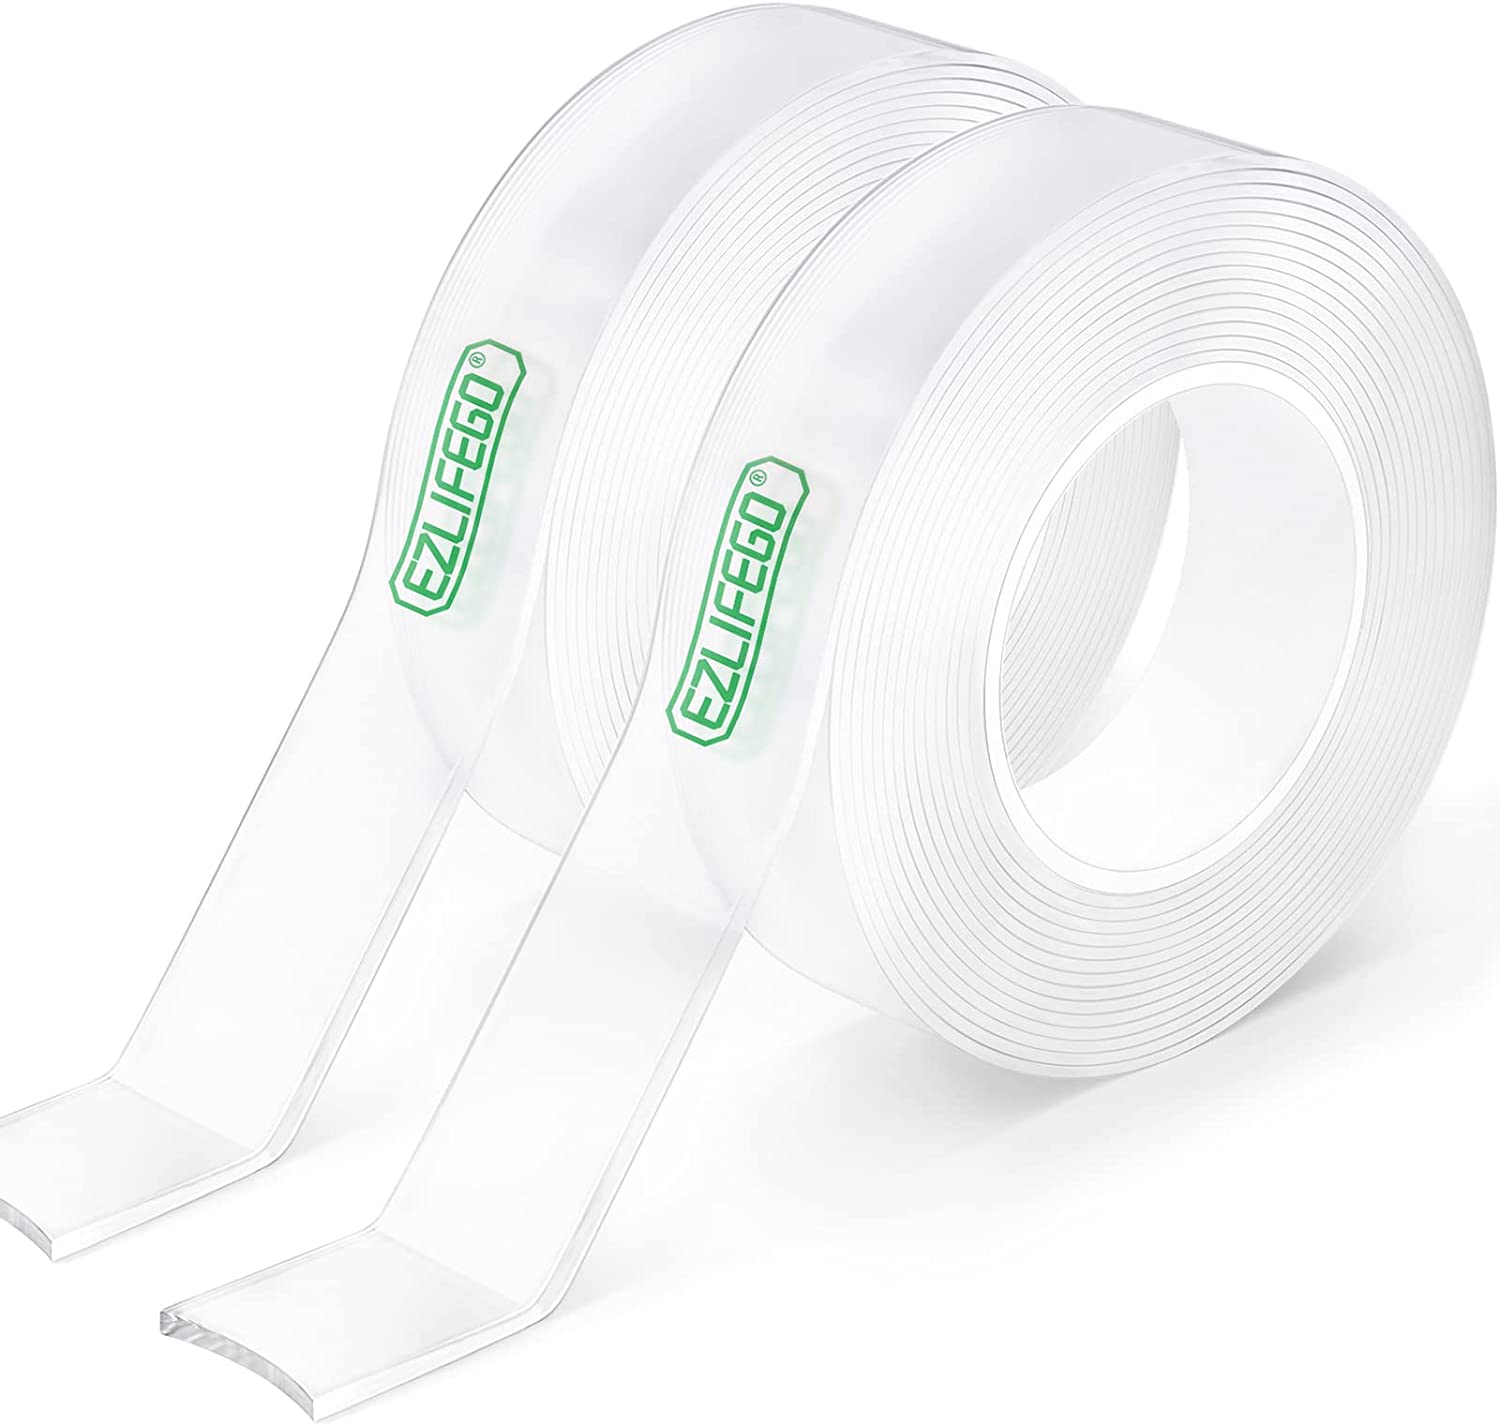 EZlifego Double Sided Tape for Household (Pack of 2, Total 33FT) – EZlifego